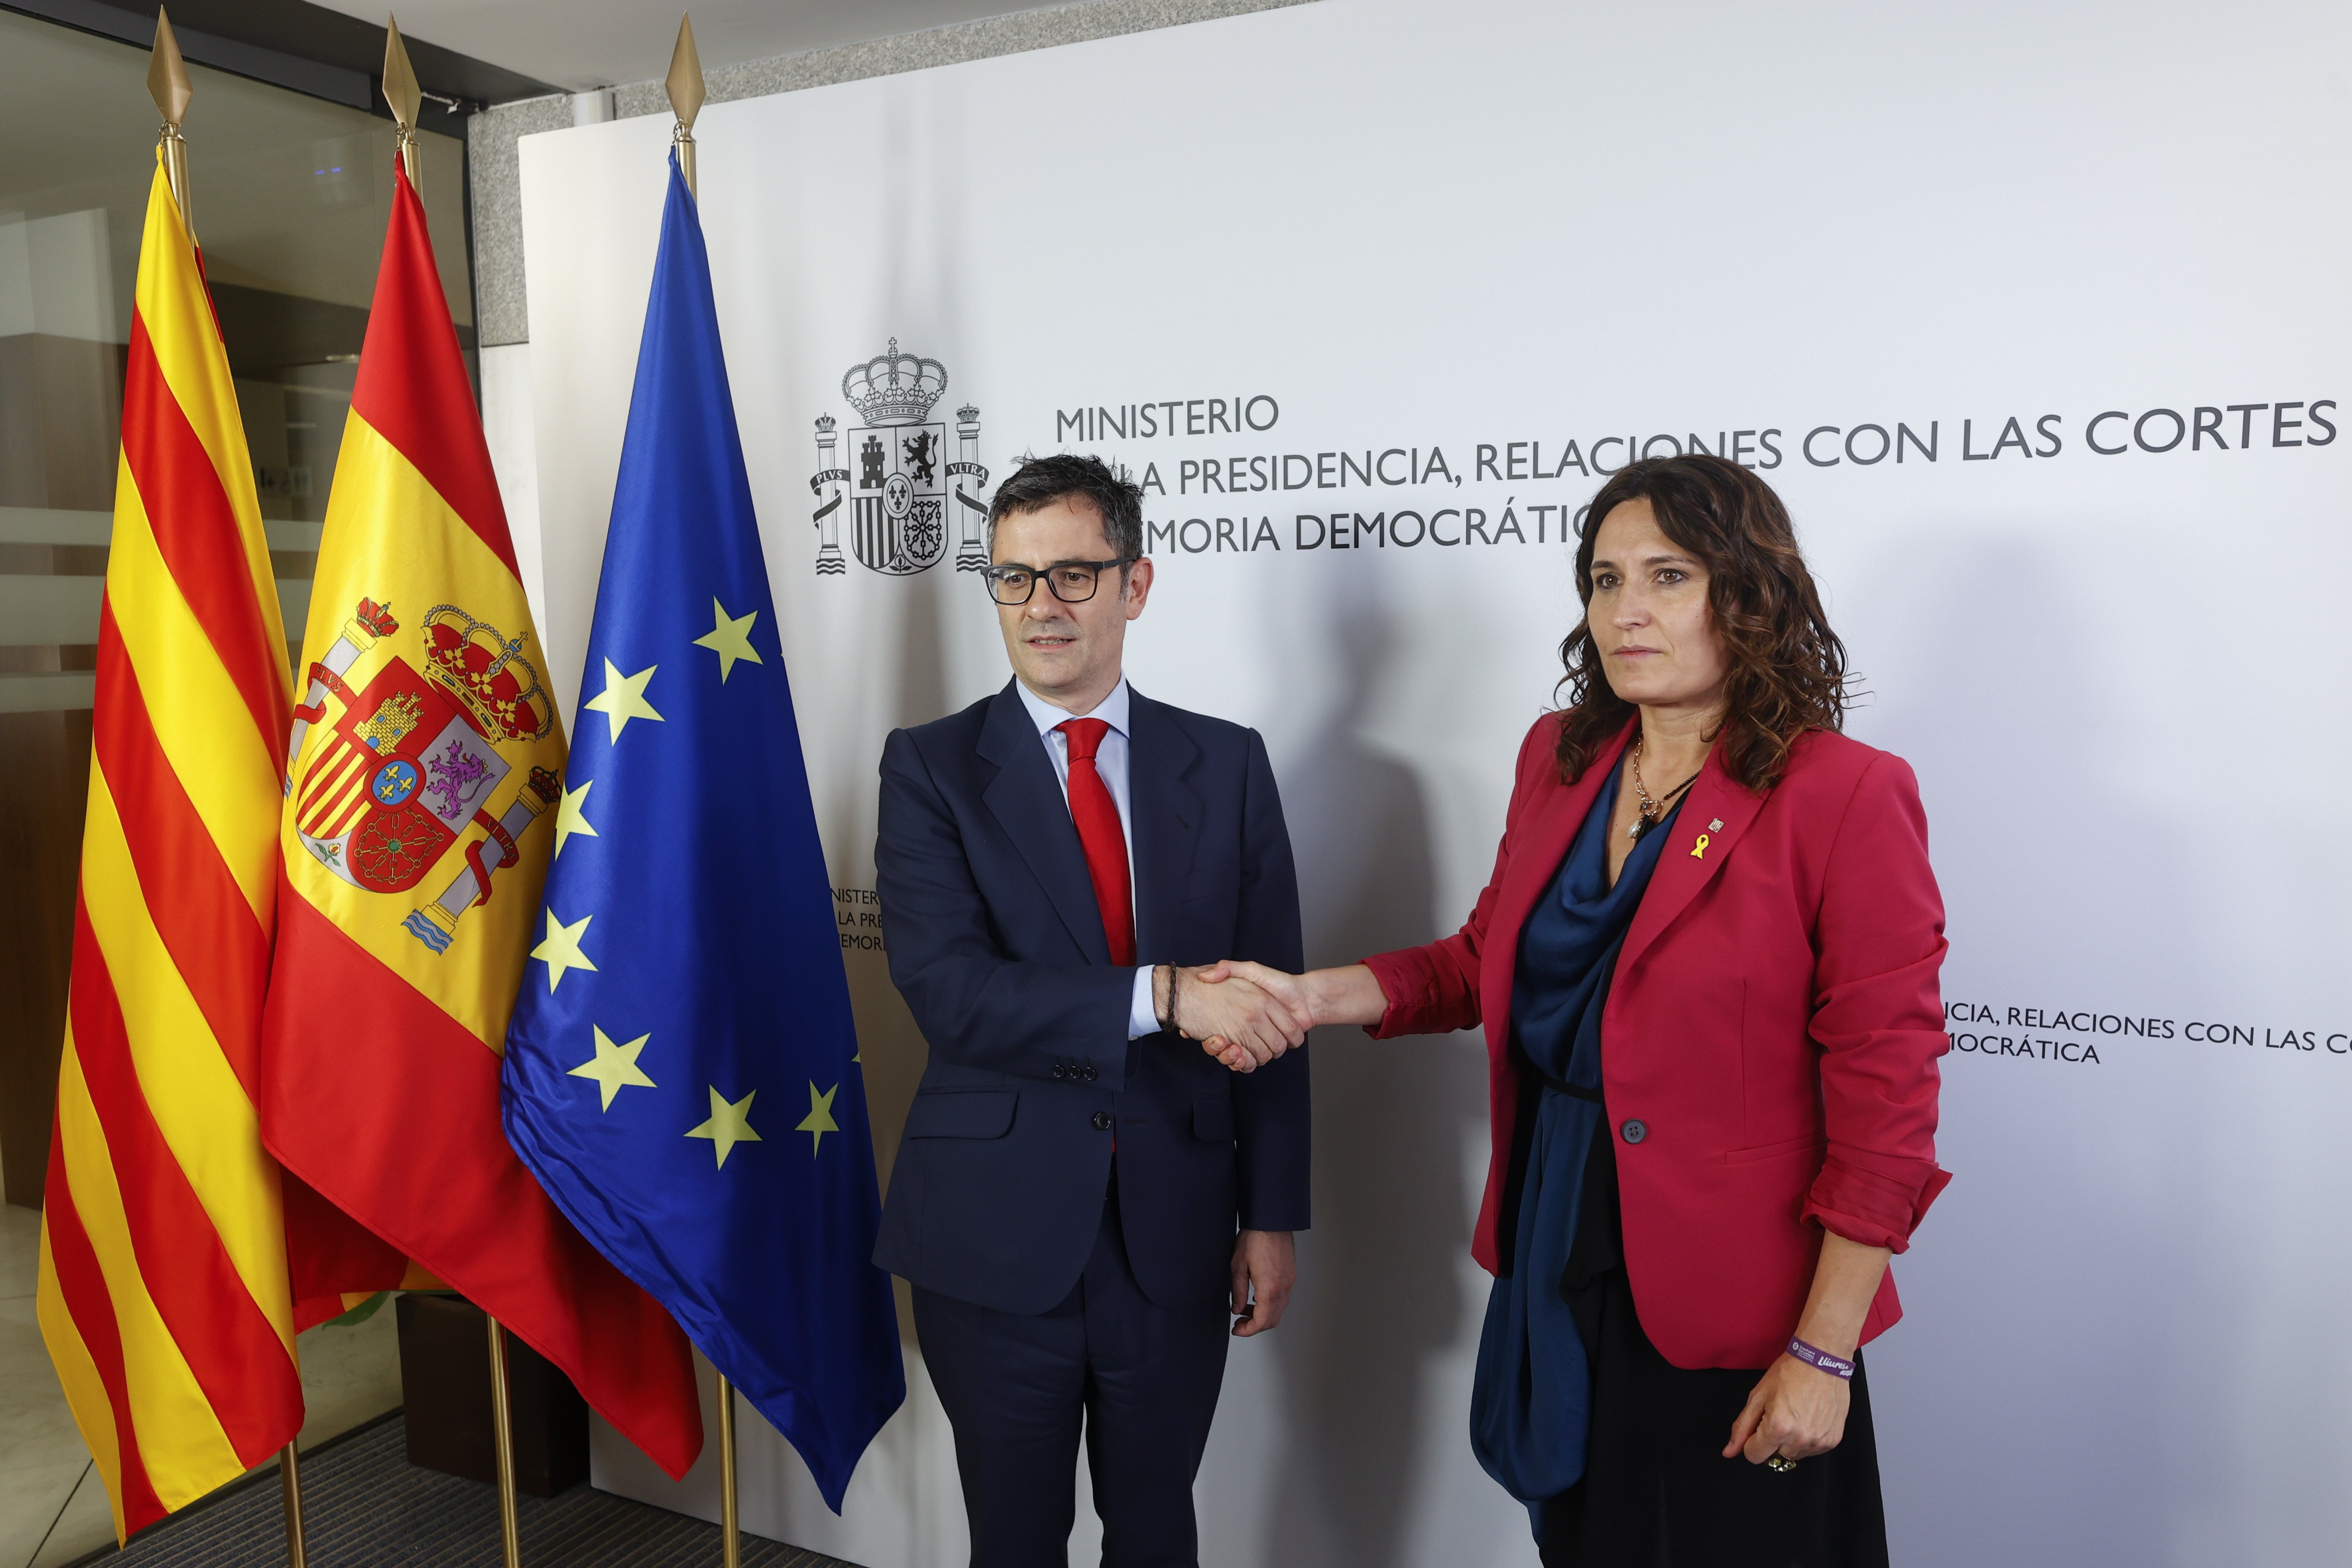 Catalan government demands "guarantees" before mending relations with Spanish executive